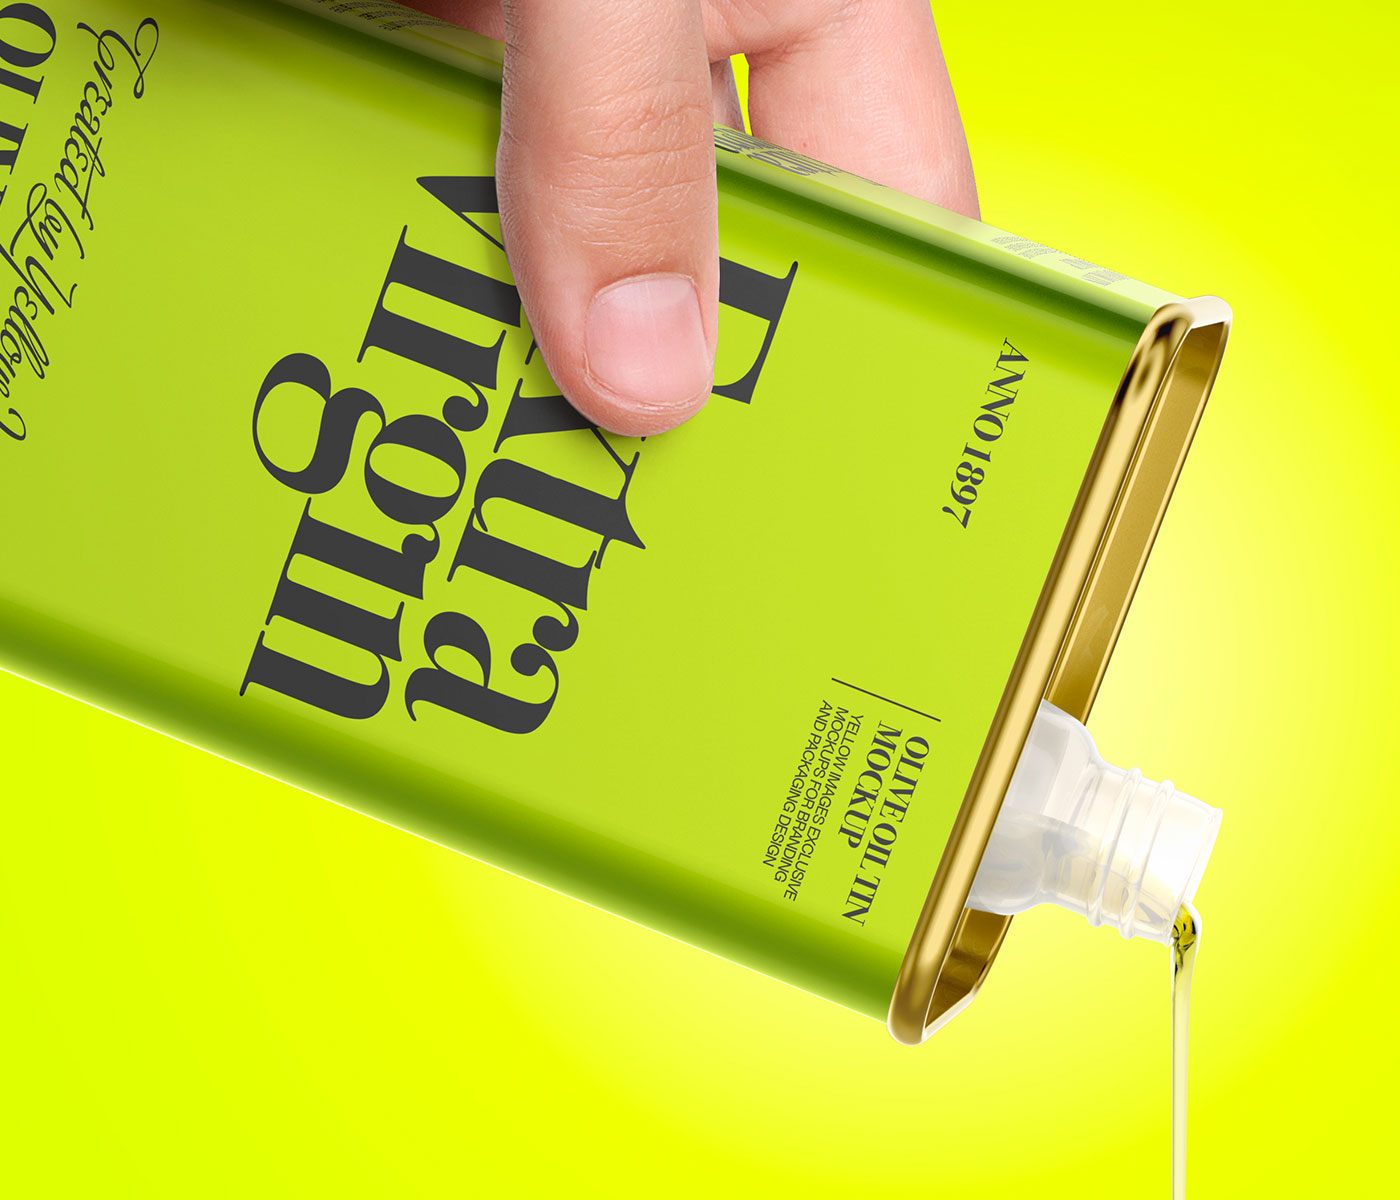 Free-Olive-Oil-Tin-Can-Mockup-PSD-2